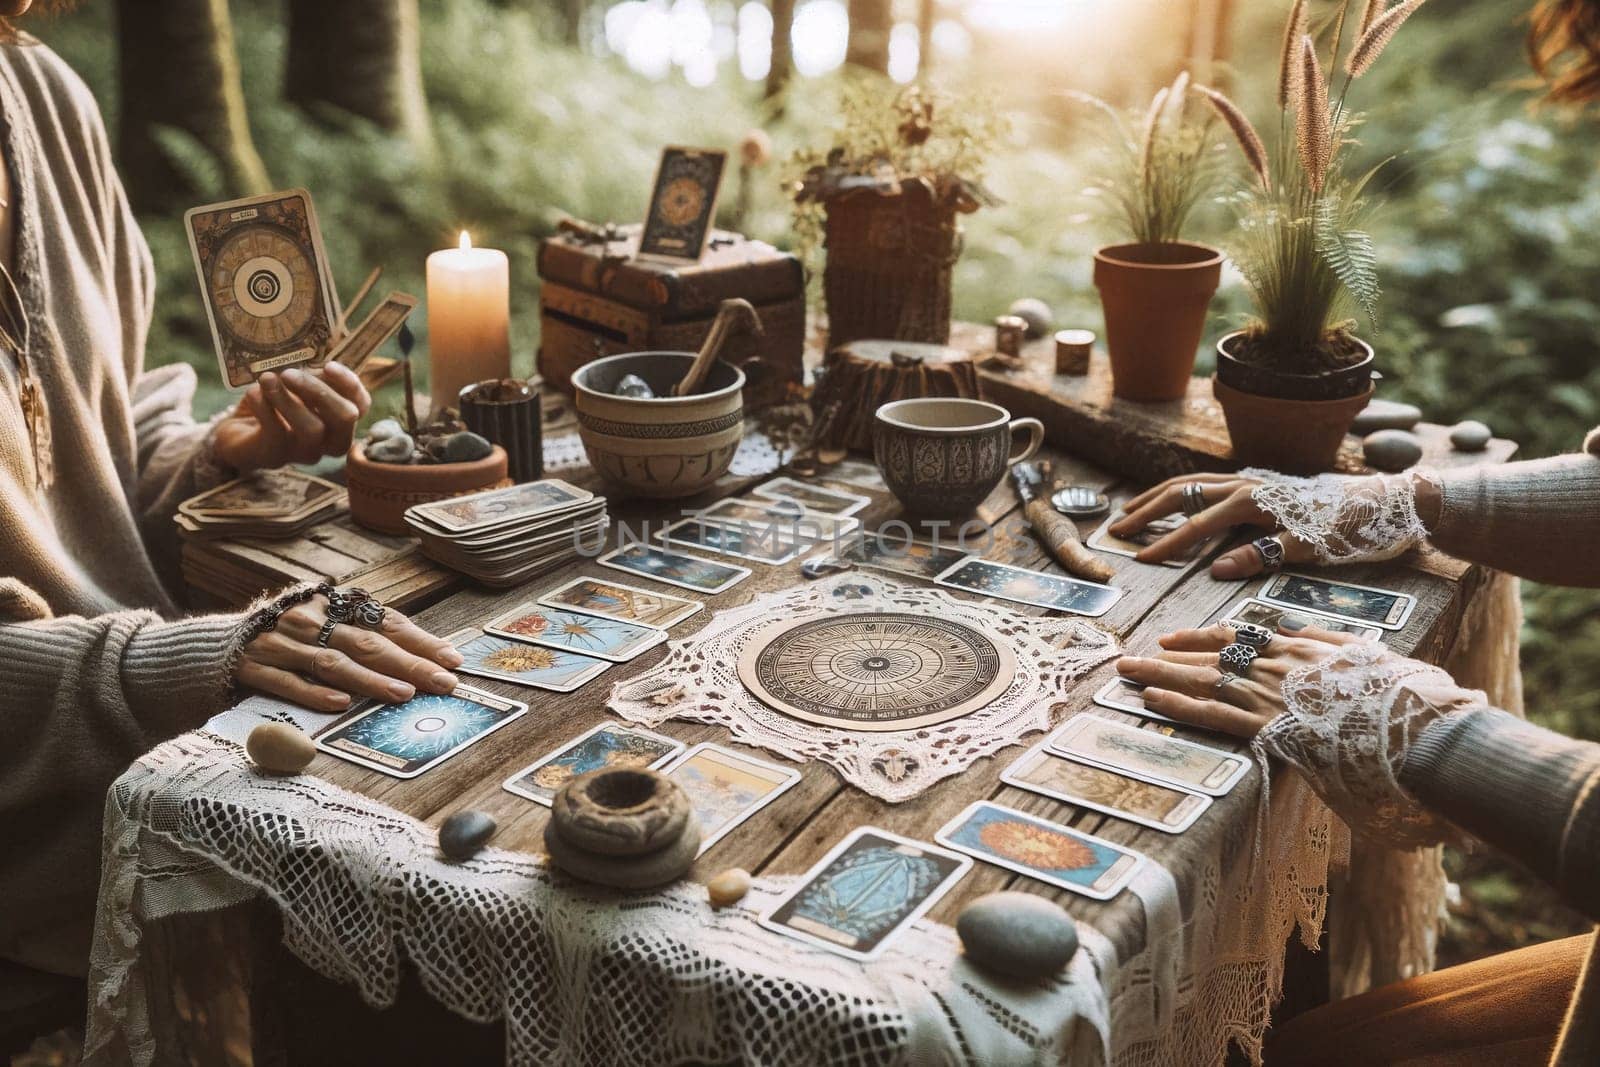 Two women lay out tarot cards on a table in the garden, esoteric attributes.